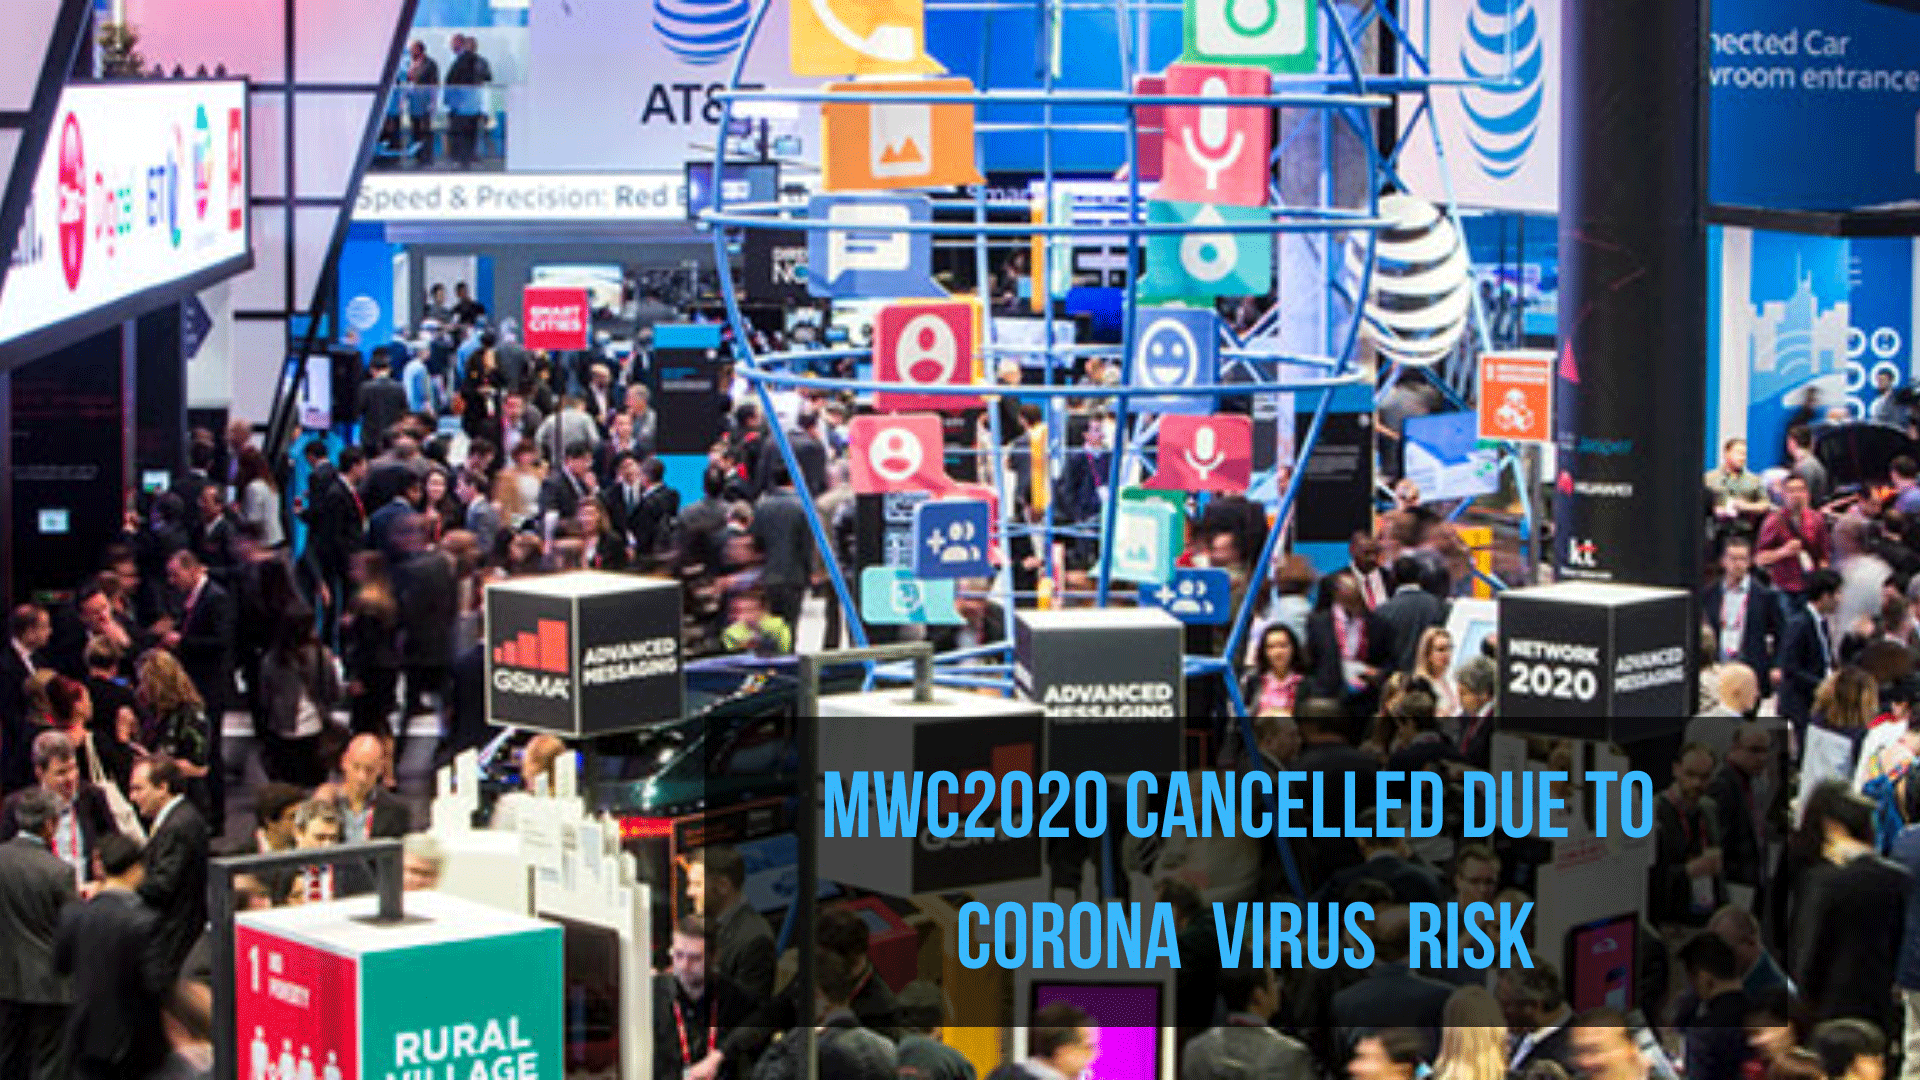 photo of the exhibit floor of the mobile world congress 2017 with lots of people and banners of companies overlay with the title MWC2020 cancelled due to corona virus risk